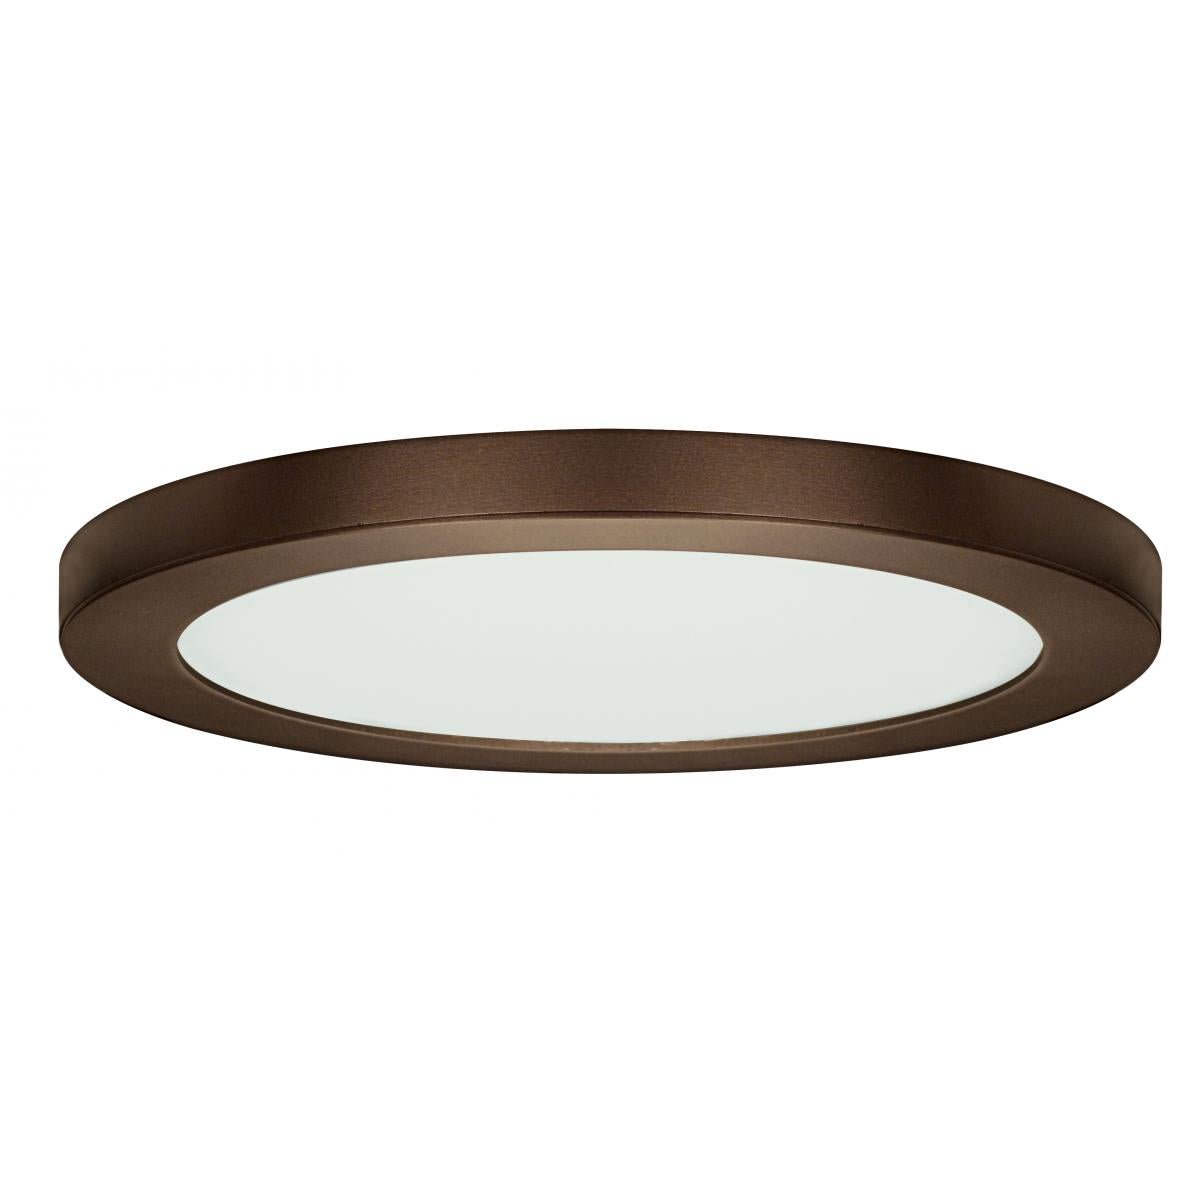 SATCO-S29652SATCO S29650 25W 13" Round LED Surface Mount 30K